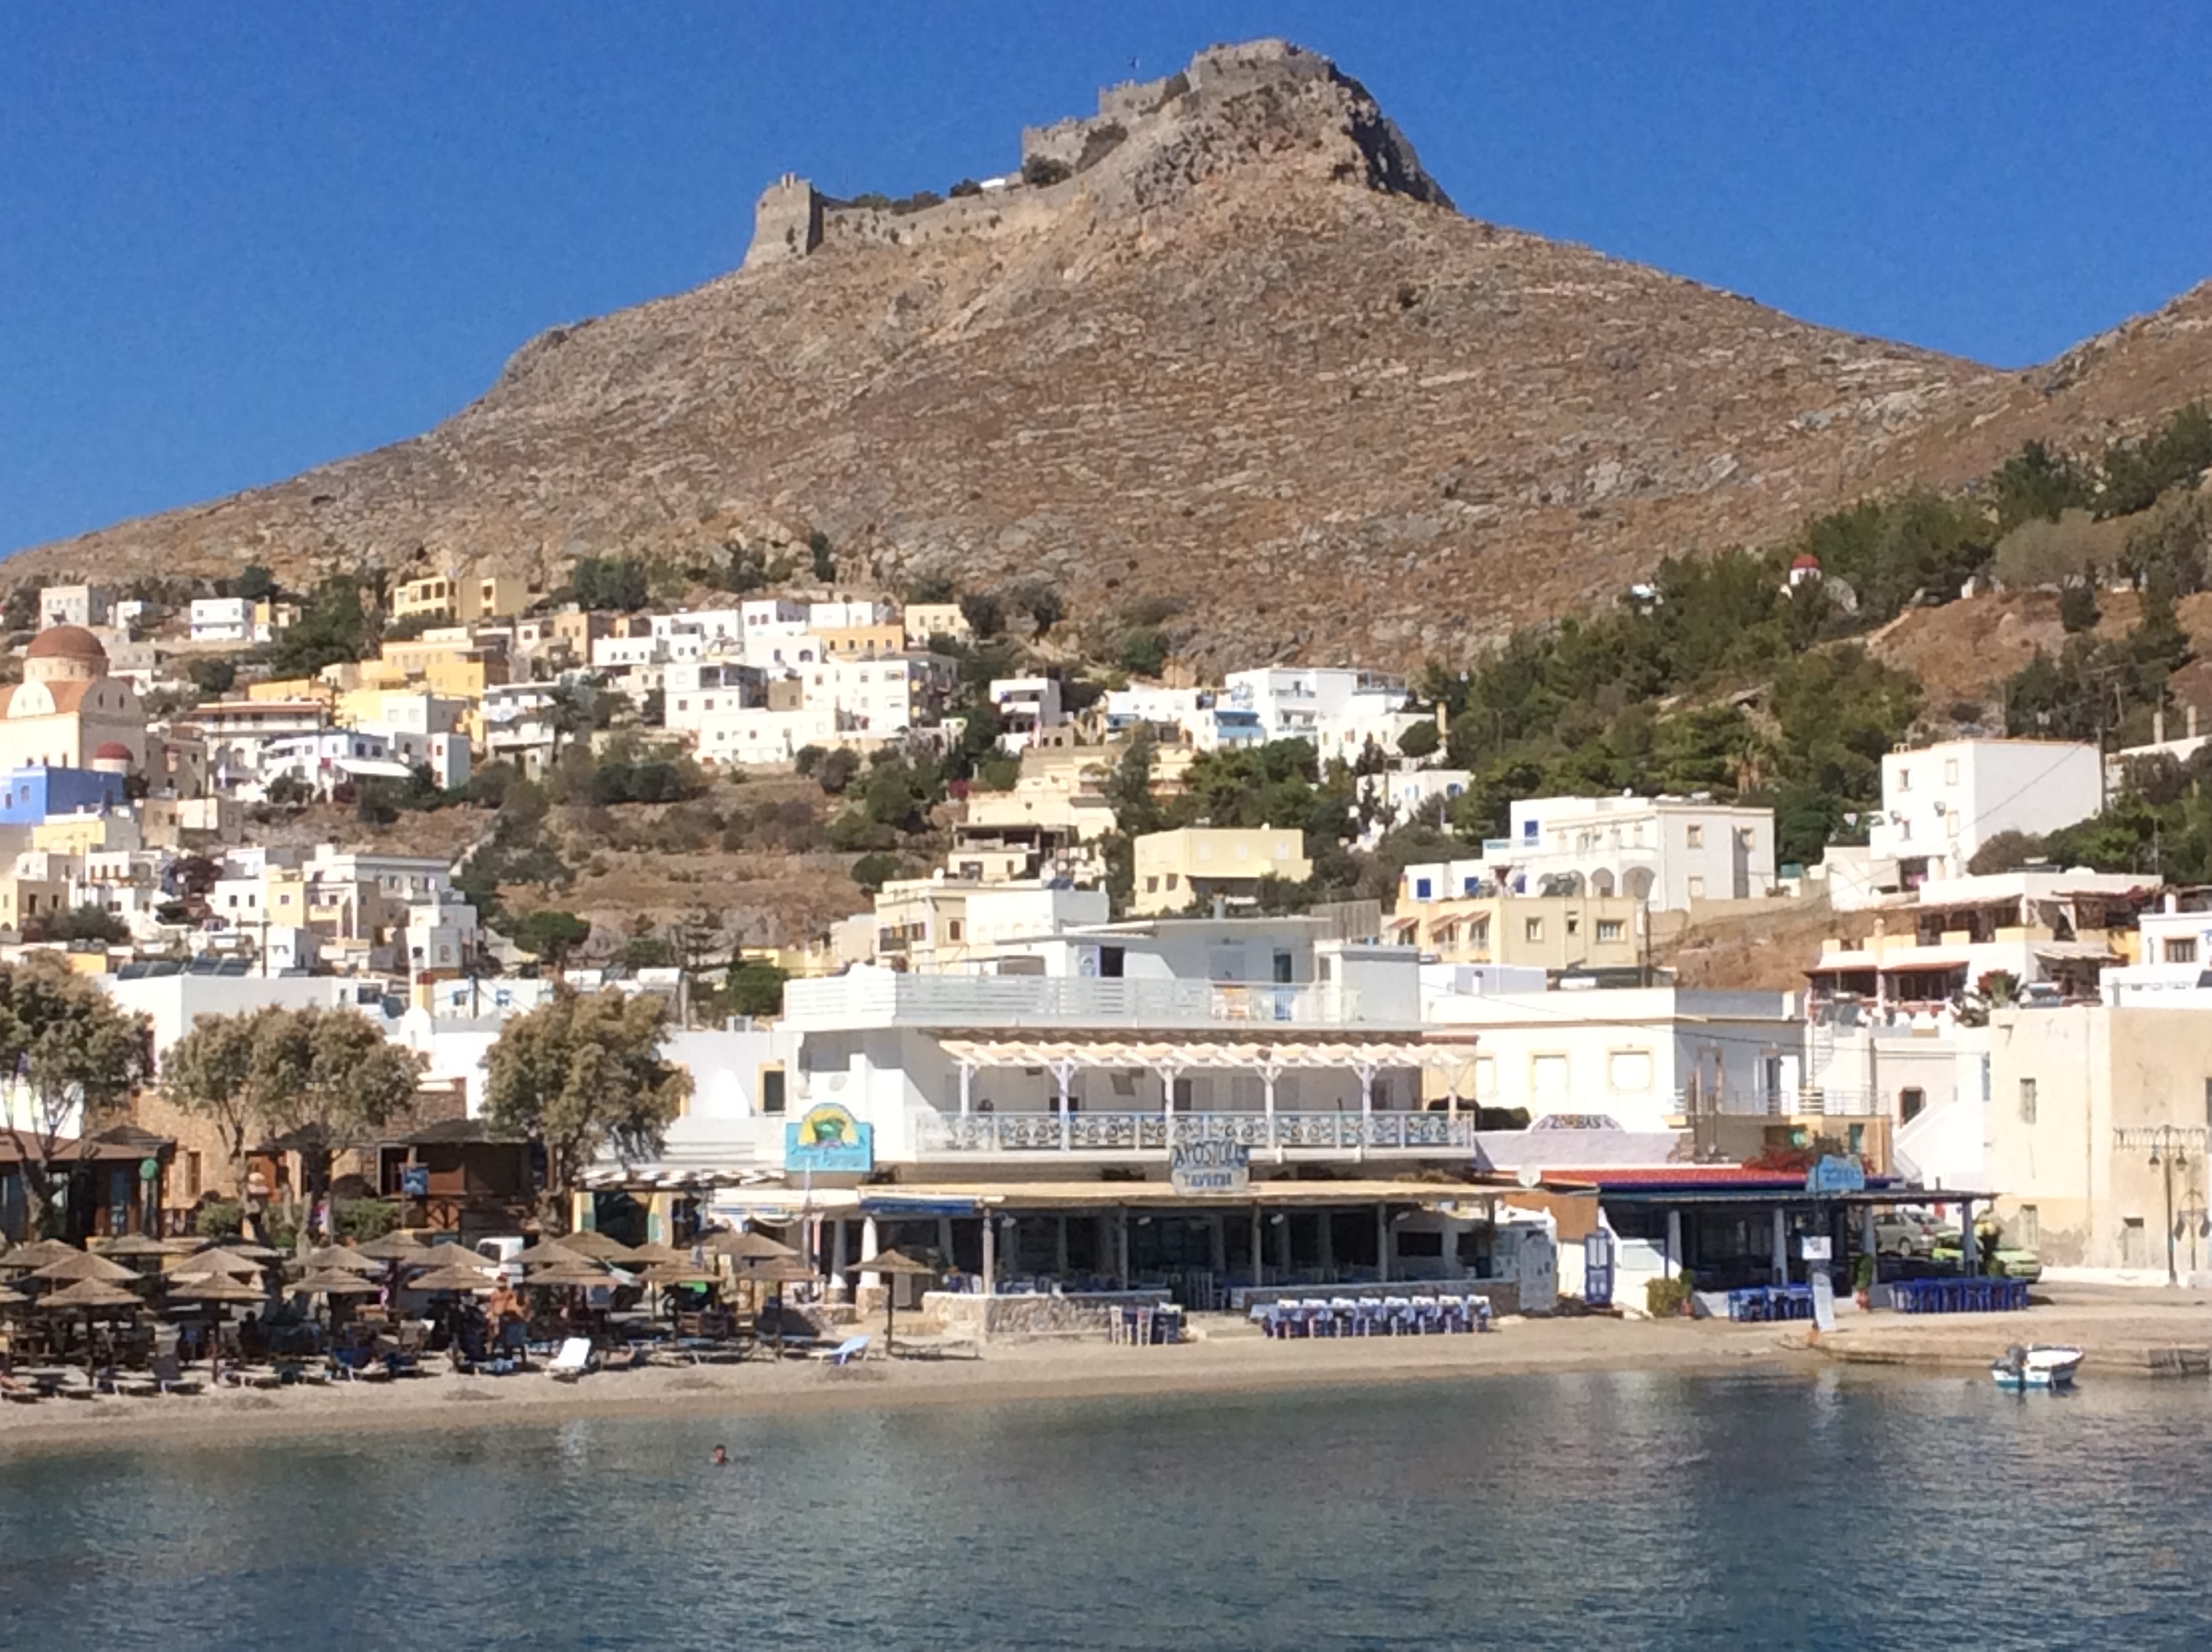 Leros, with Pandeli Castle in the background